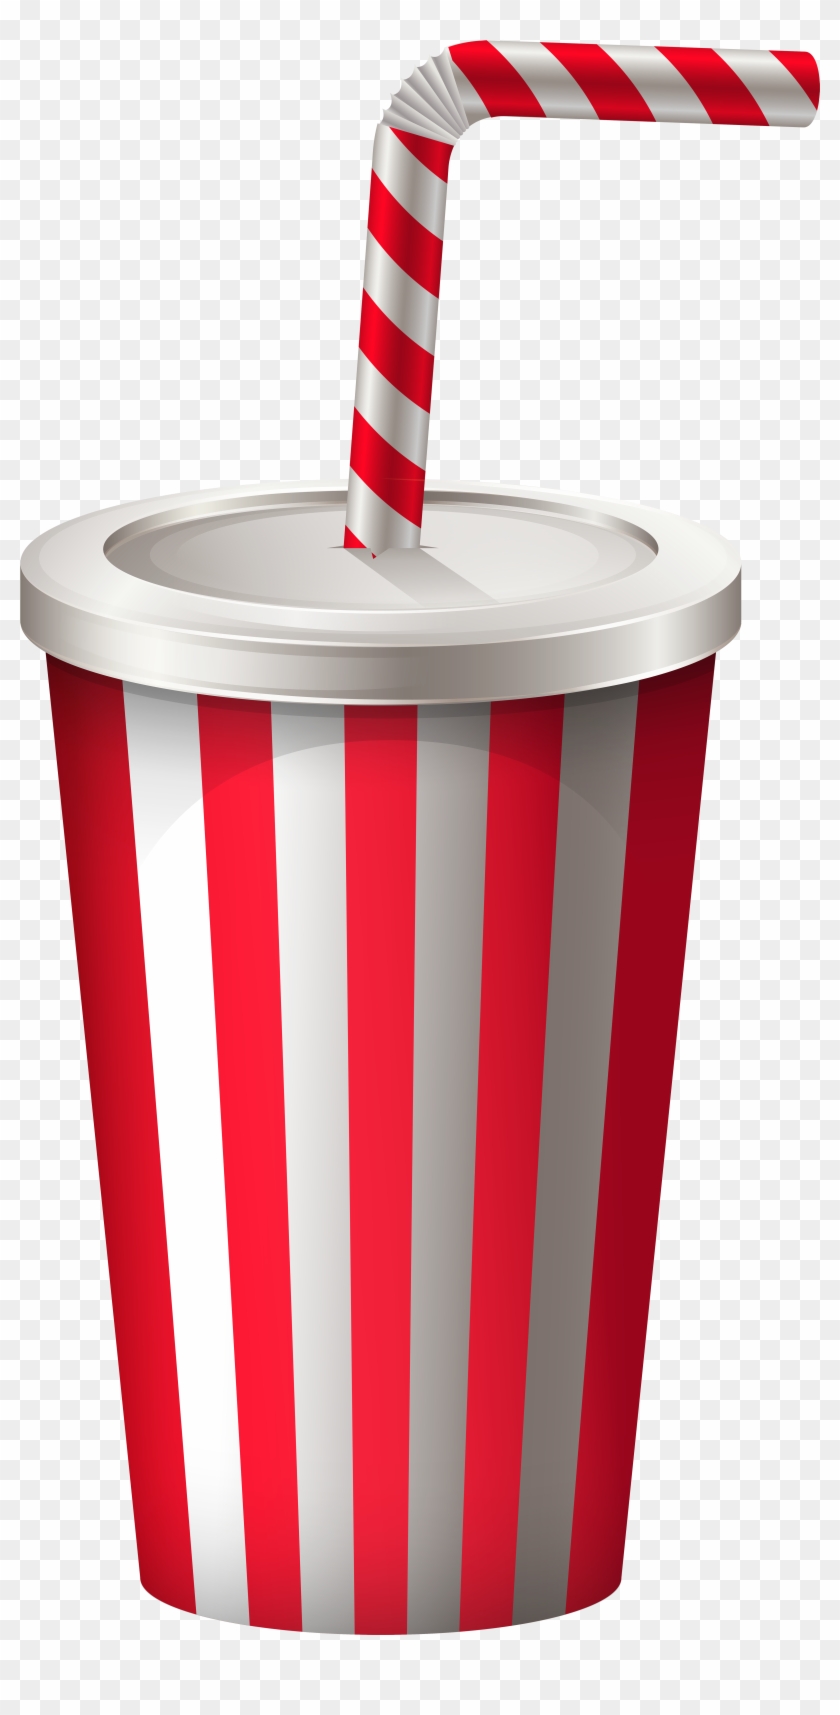 Drink Cup With Straw Png Transparent Clip Art Image - Drink With Straw Transparent